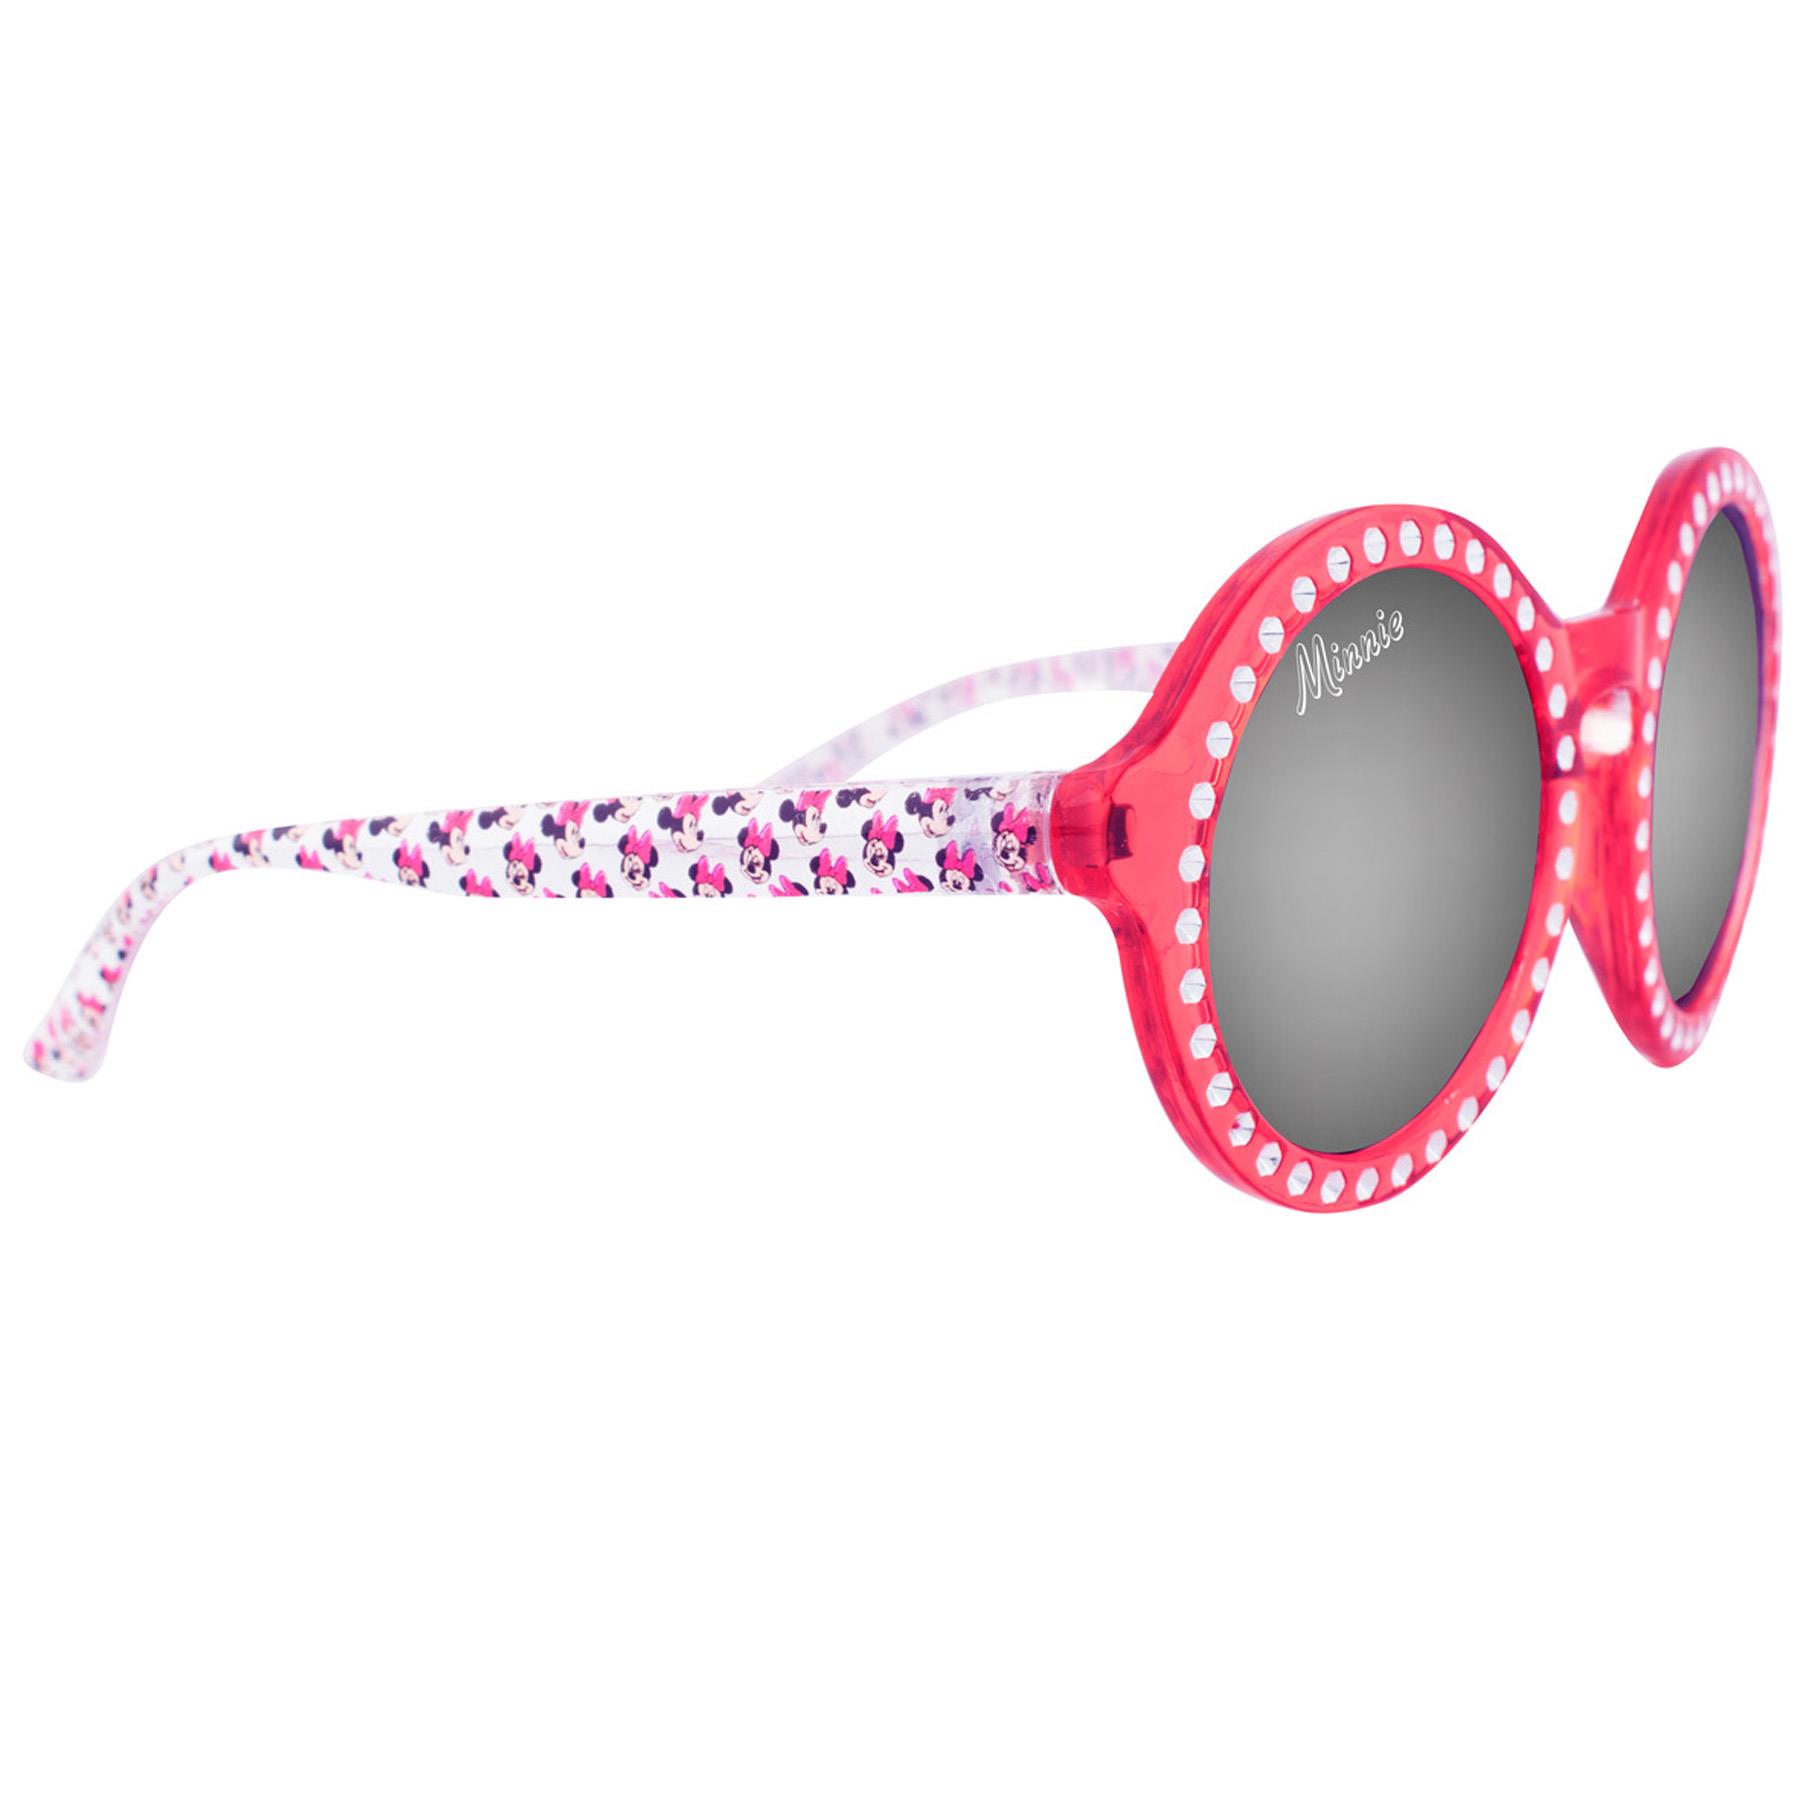 Disney Minnie Mouse Children's Sunglasses UV protection for Holiday - MIN29